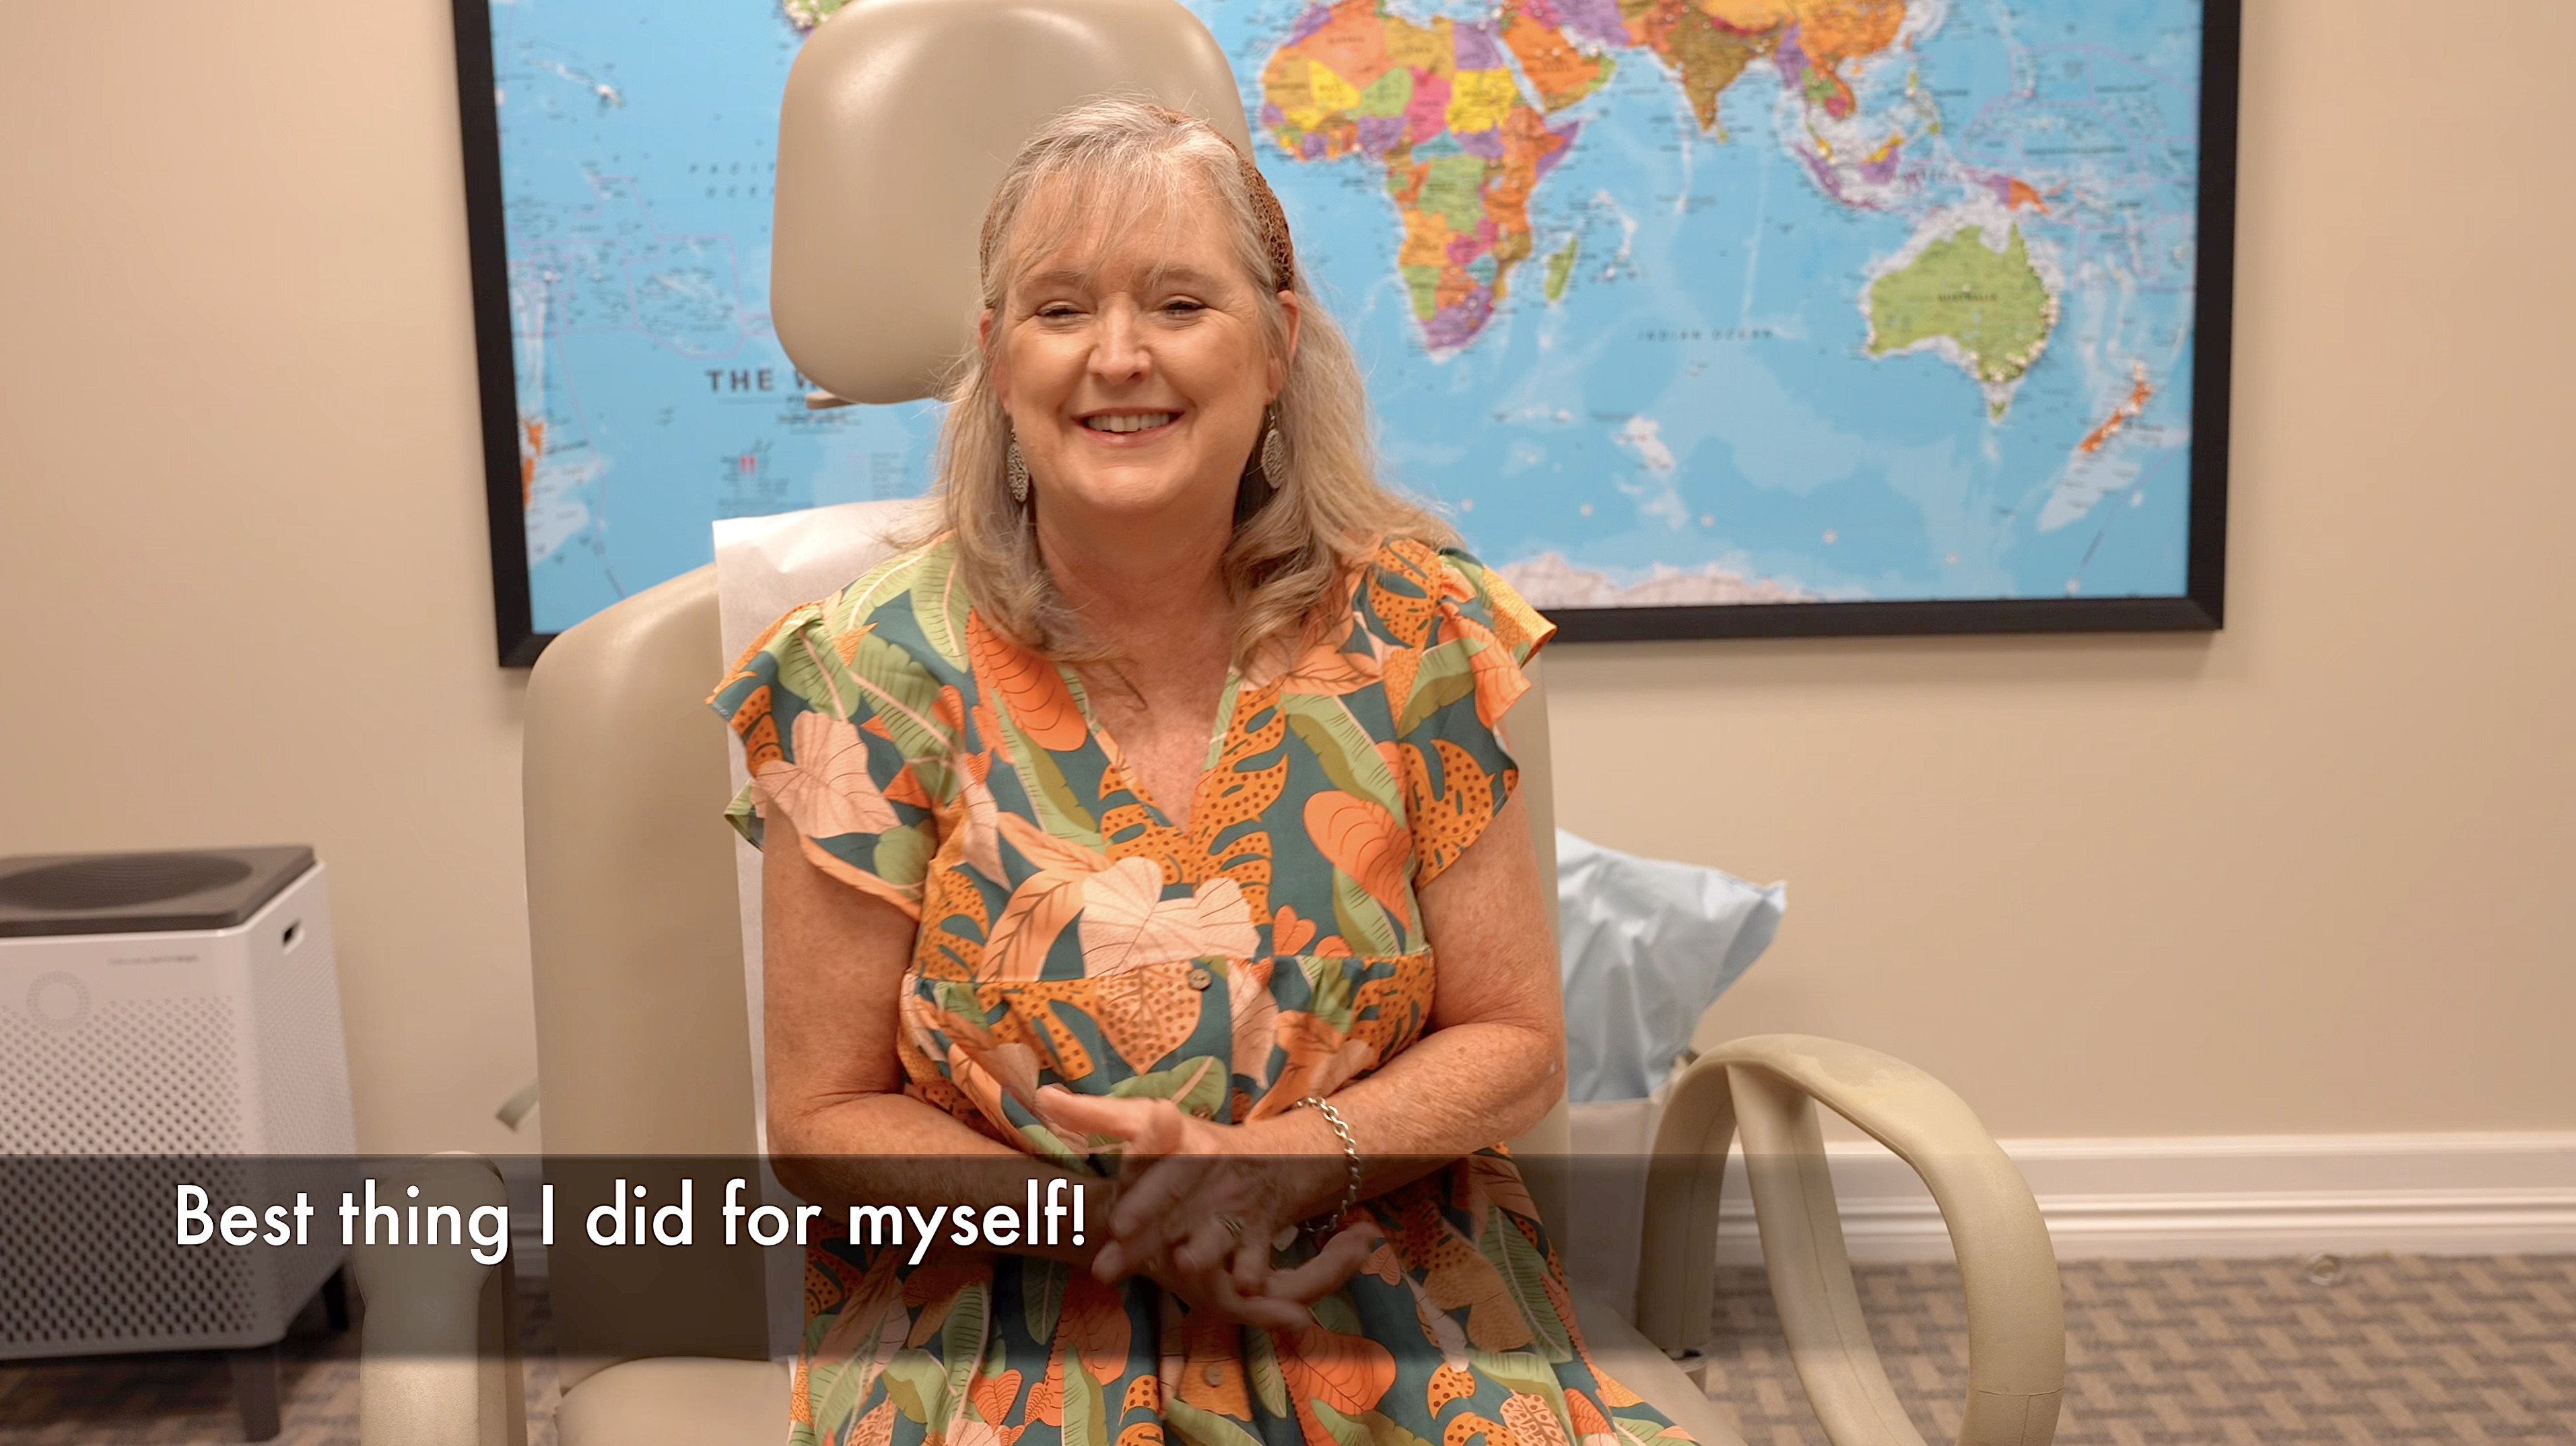 “Best thing I did for myself!” after PSE stroke treatment by Edward Tobinick, M.D.